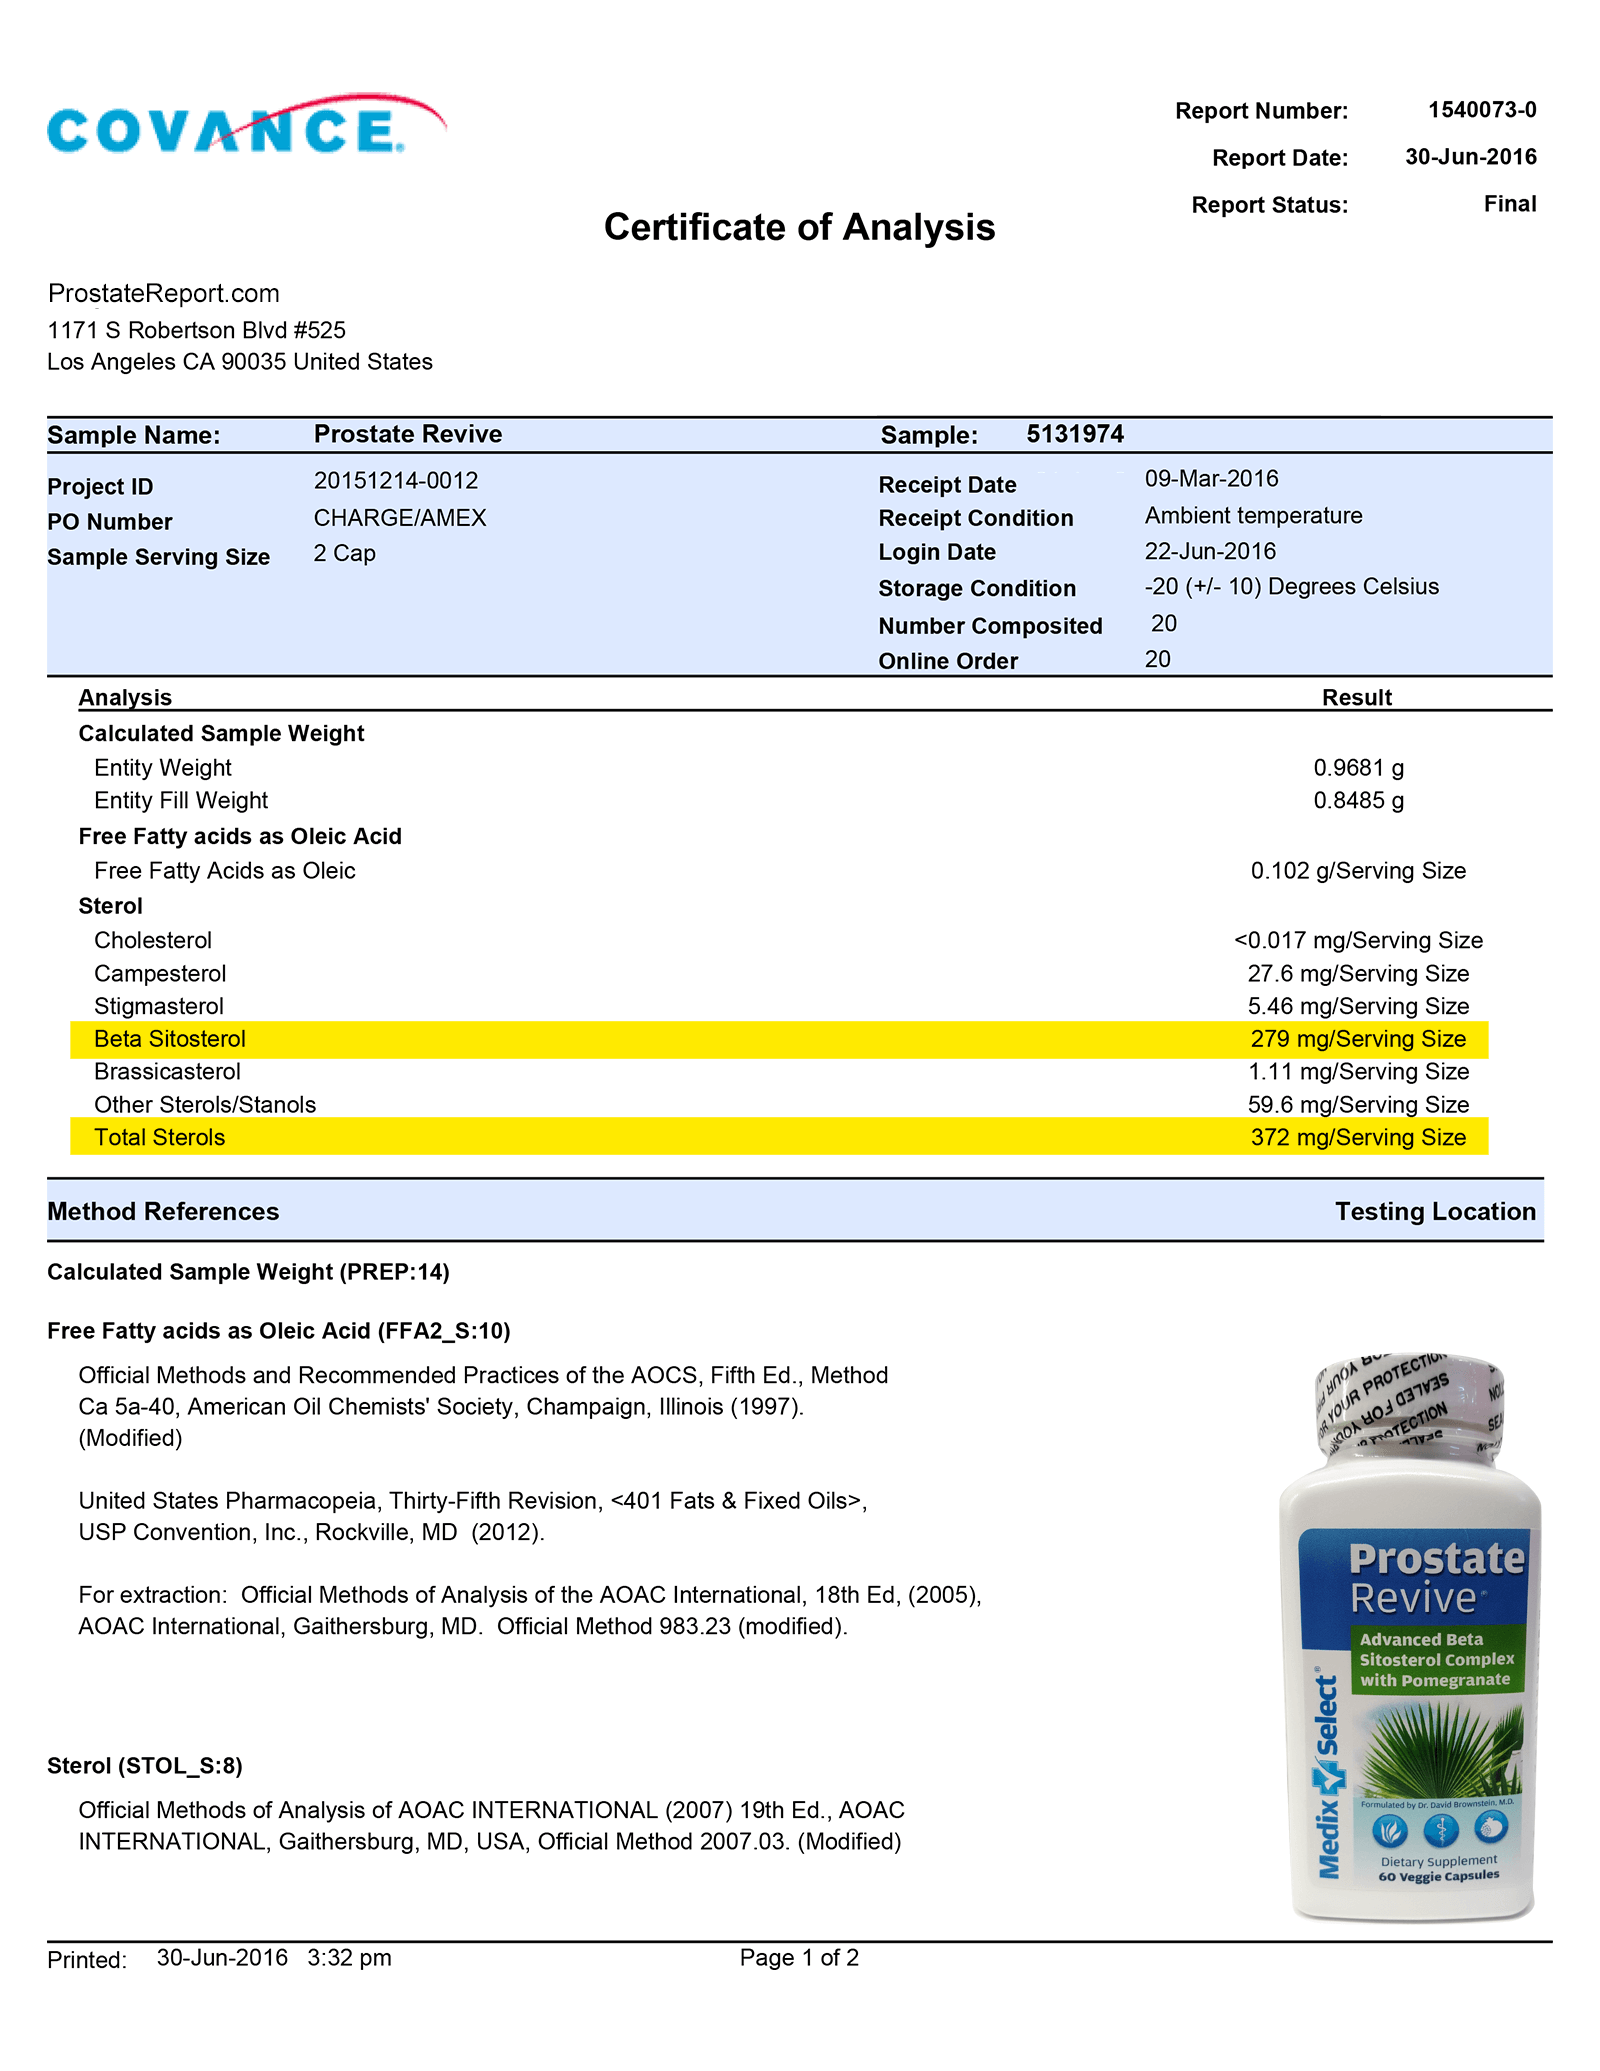 Prostate Revive lab report 